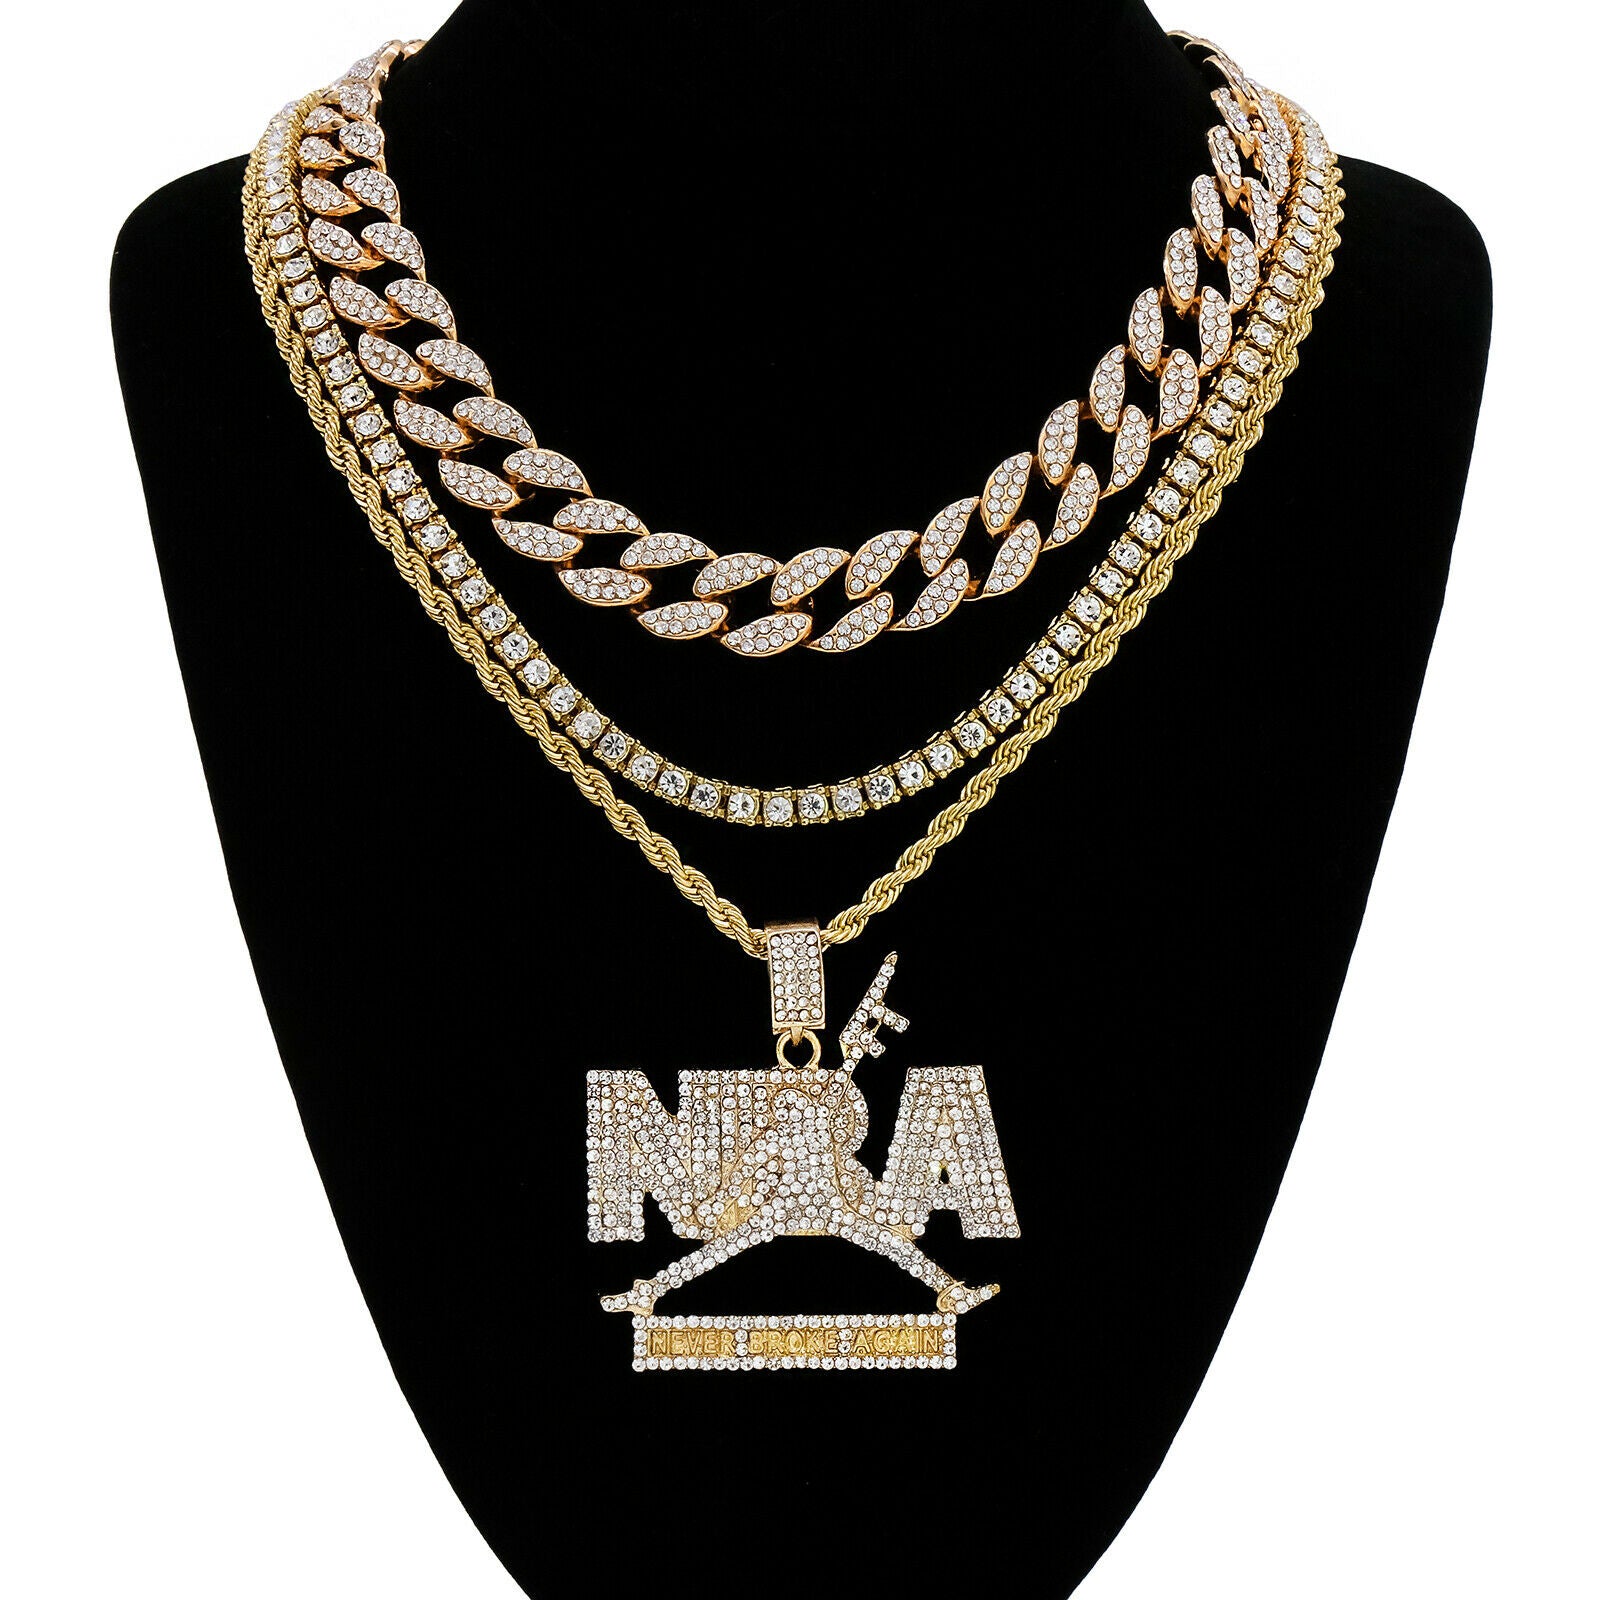 nba chain necklace